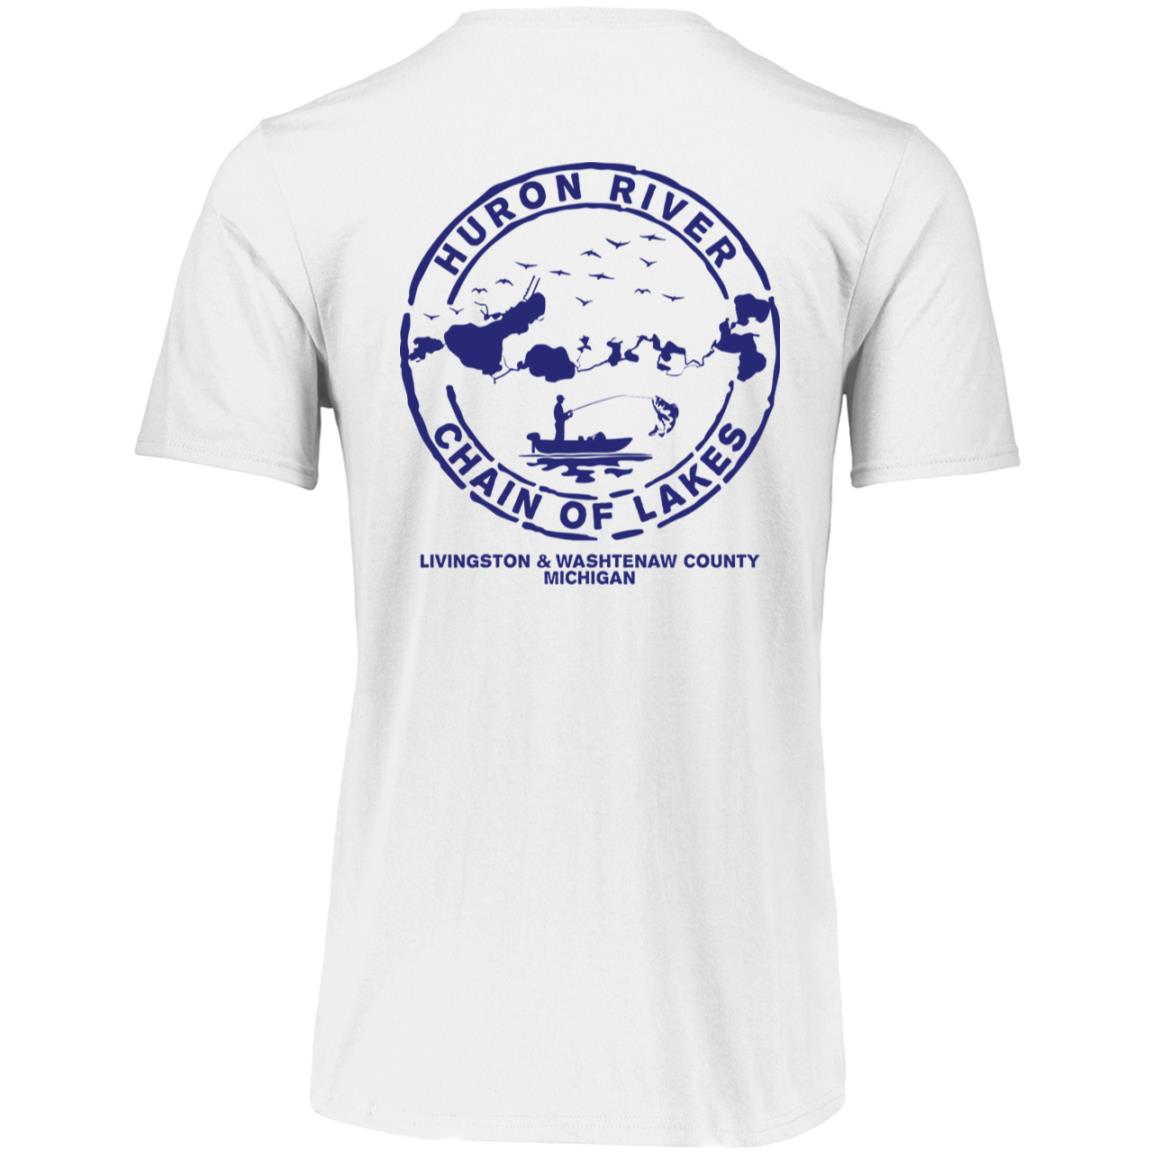 HRCL FL - Navy Boat.... Bust Out Another Thousand - 2 Sided 64STTM Essential Dri-Power Tee